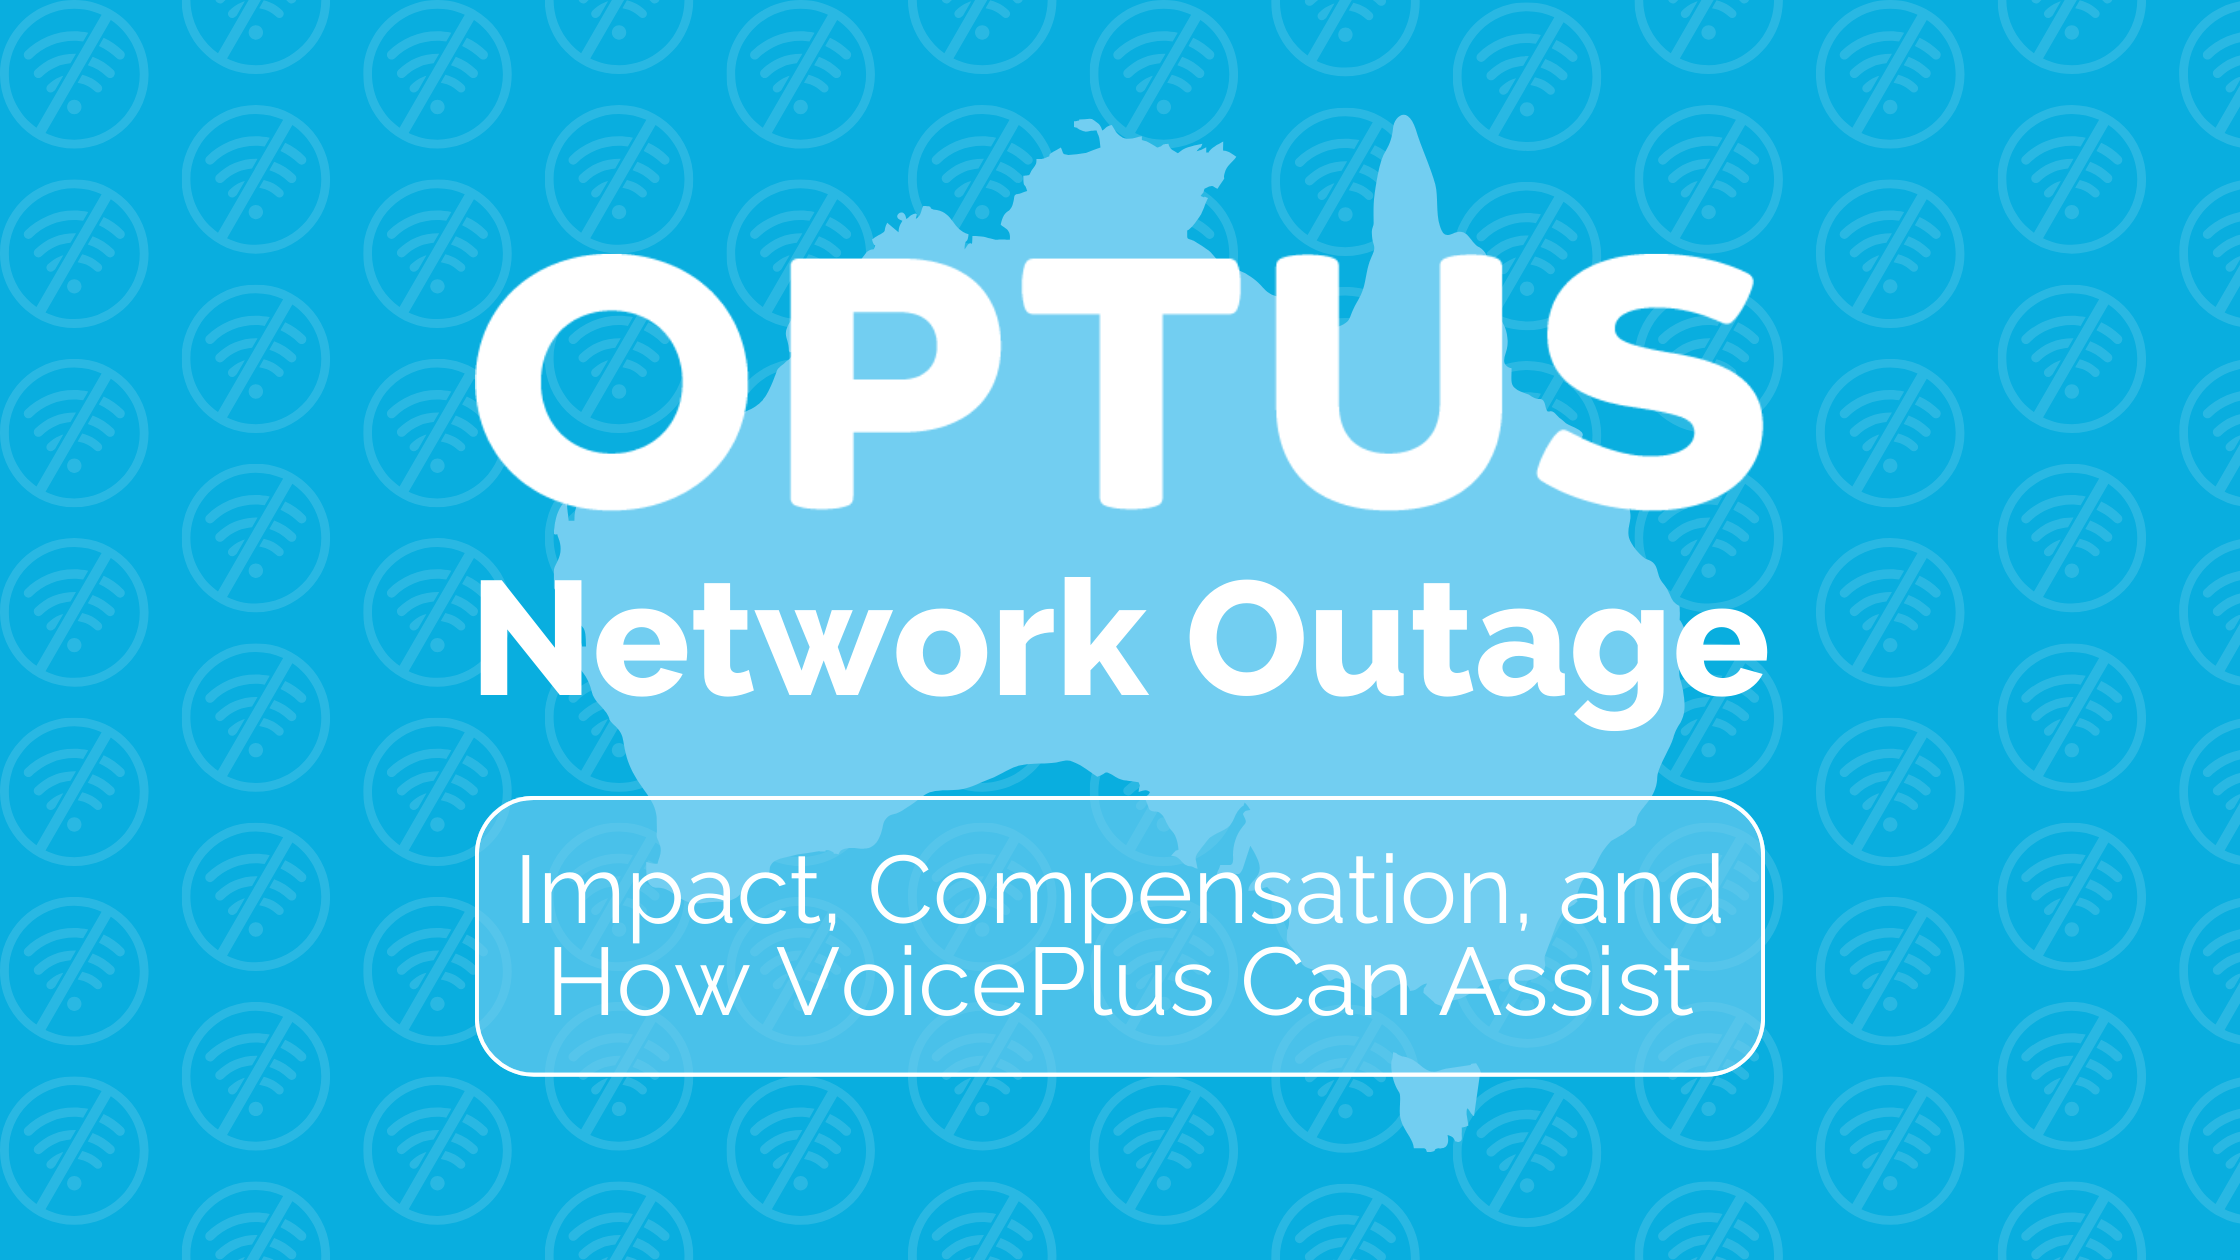 Optus Network Outage: Impact, Compensation, and How VoicePlus Can Assist